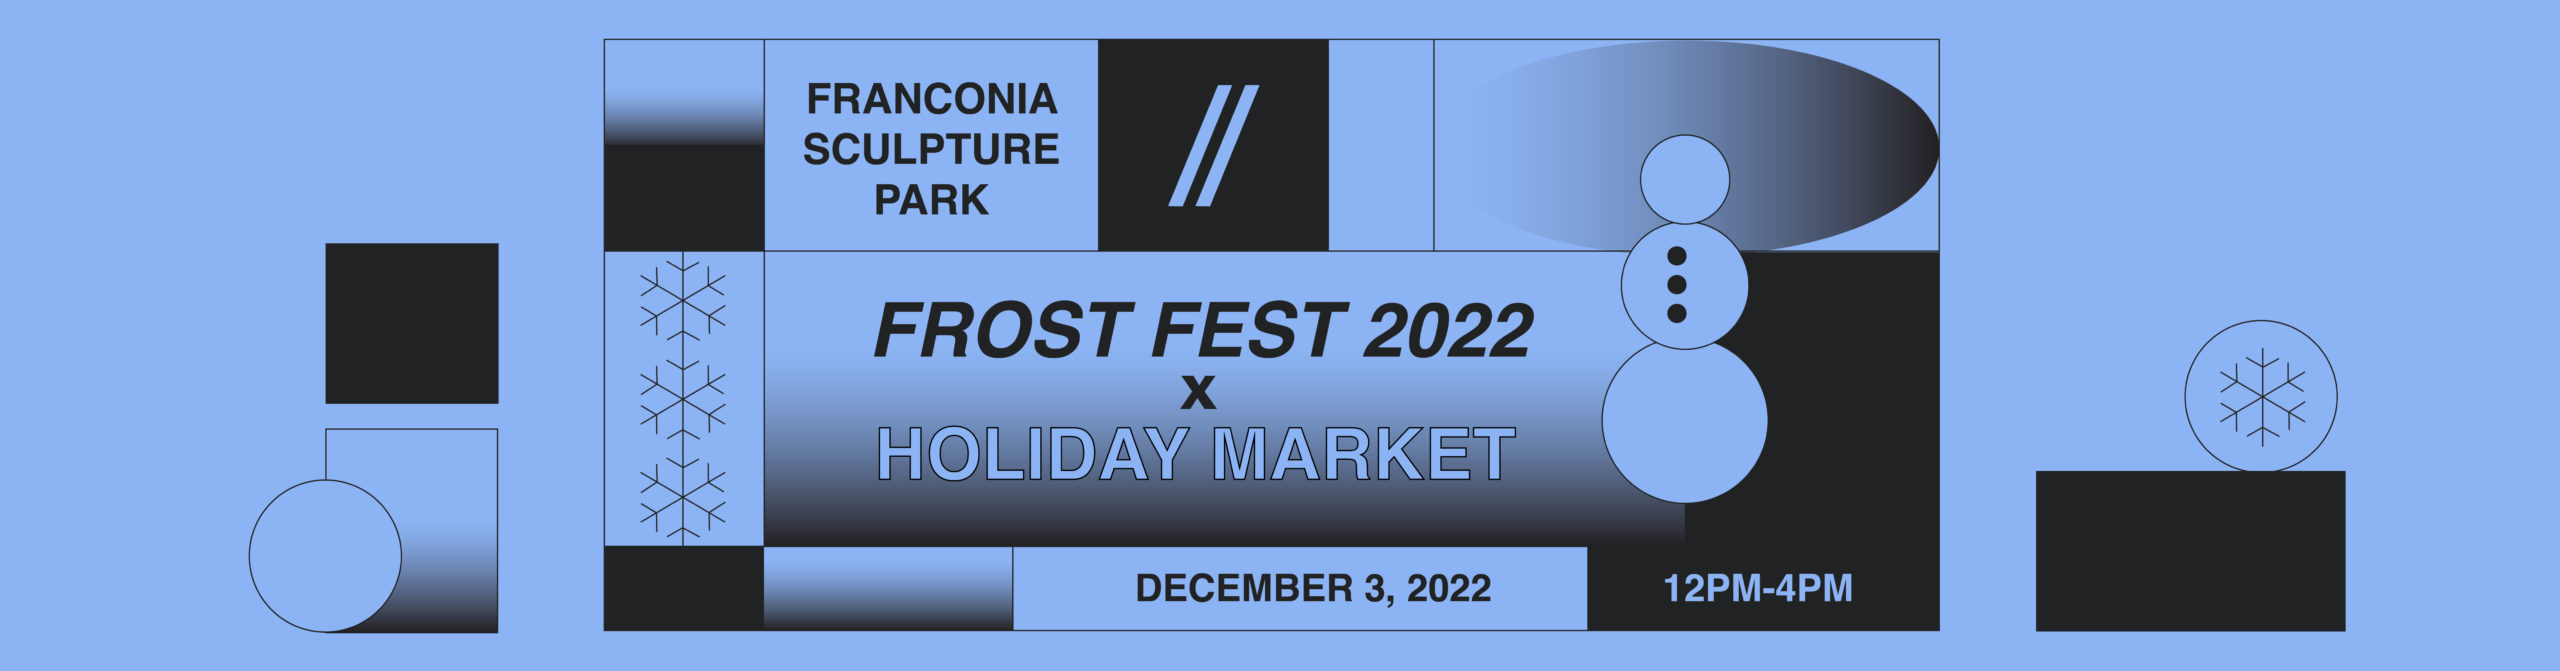 franconia-frost-fest-holiday-market-2021